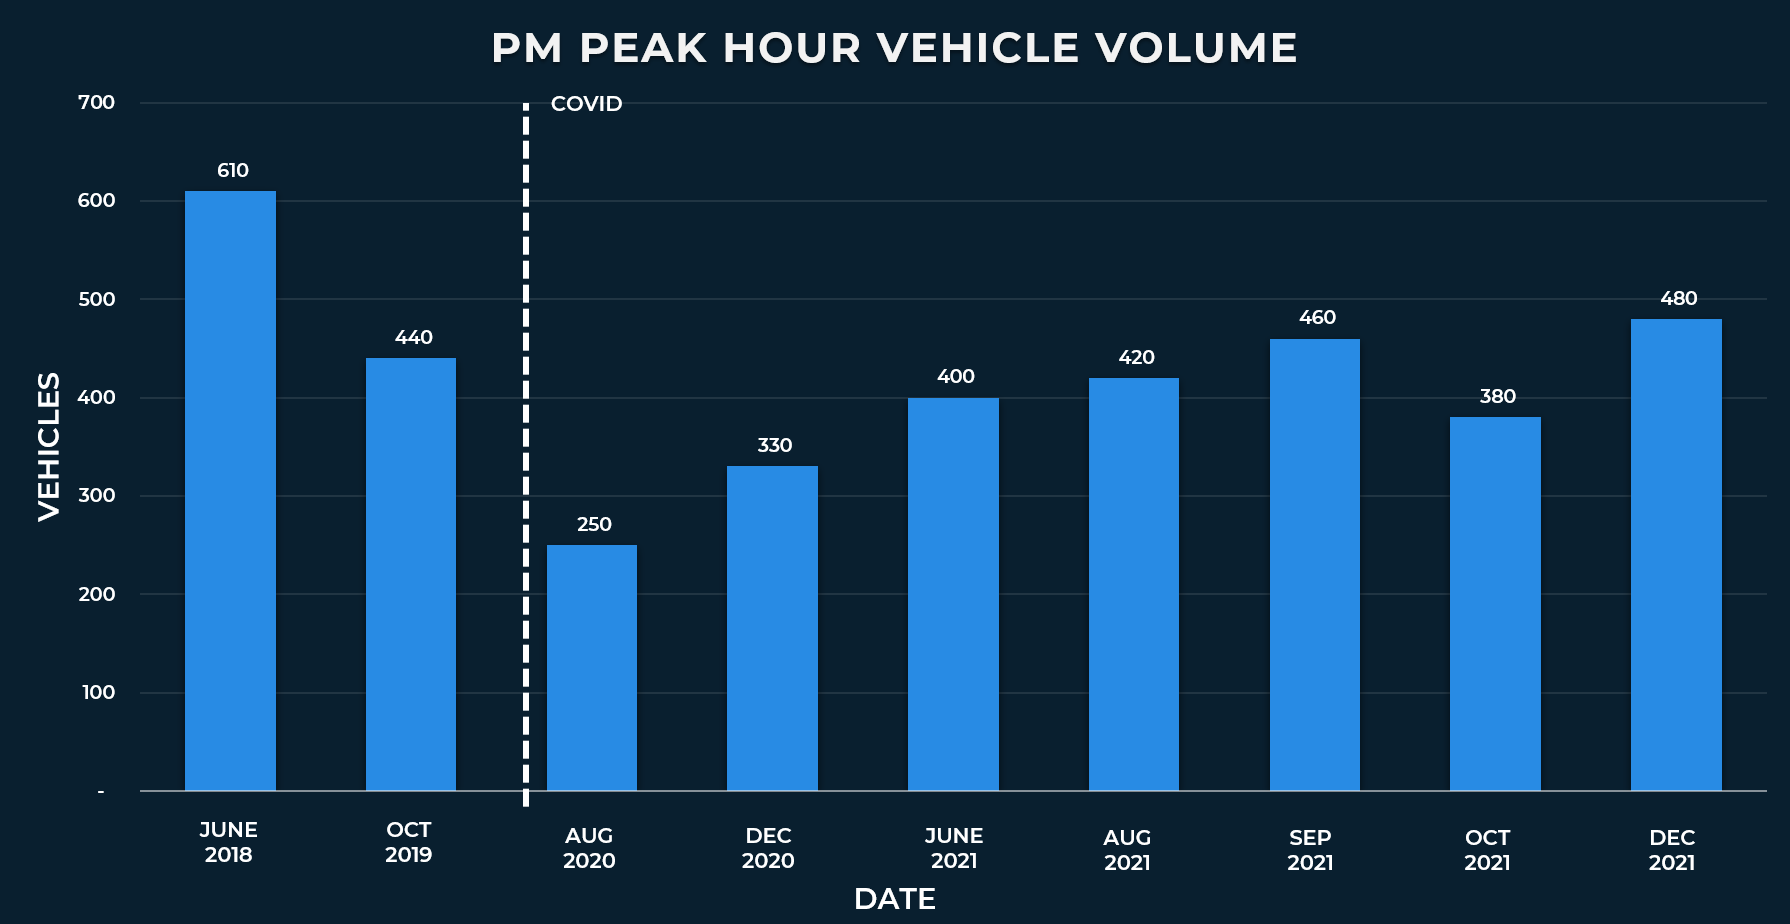 A bar chart shows the a.m. peak hour volumes we measured on State Street. June 2018: 610 October 2019: 440 August 2020: 250 December 2020: 330 June 2021: 400 August 2021: 420 September 2021: 460 October 2021: 380 December 2021: 480